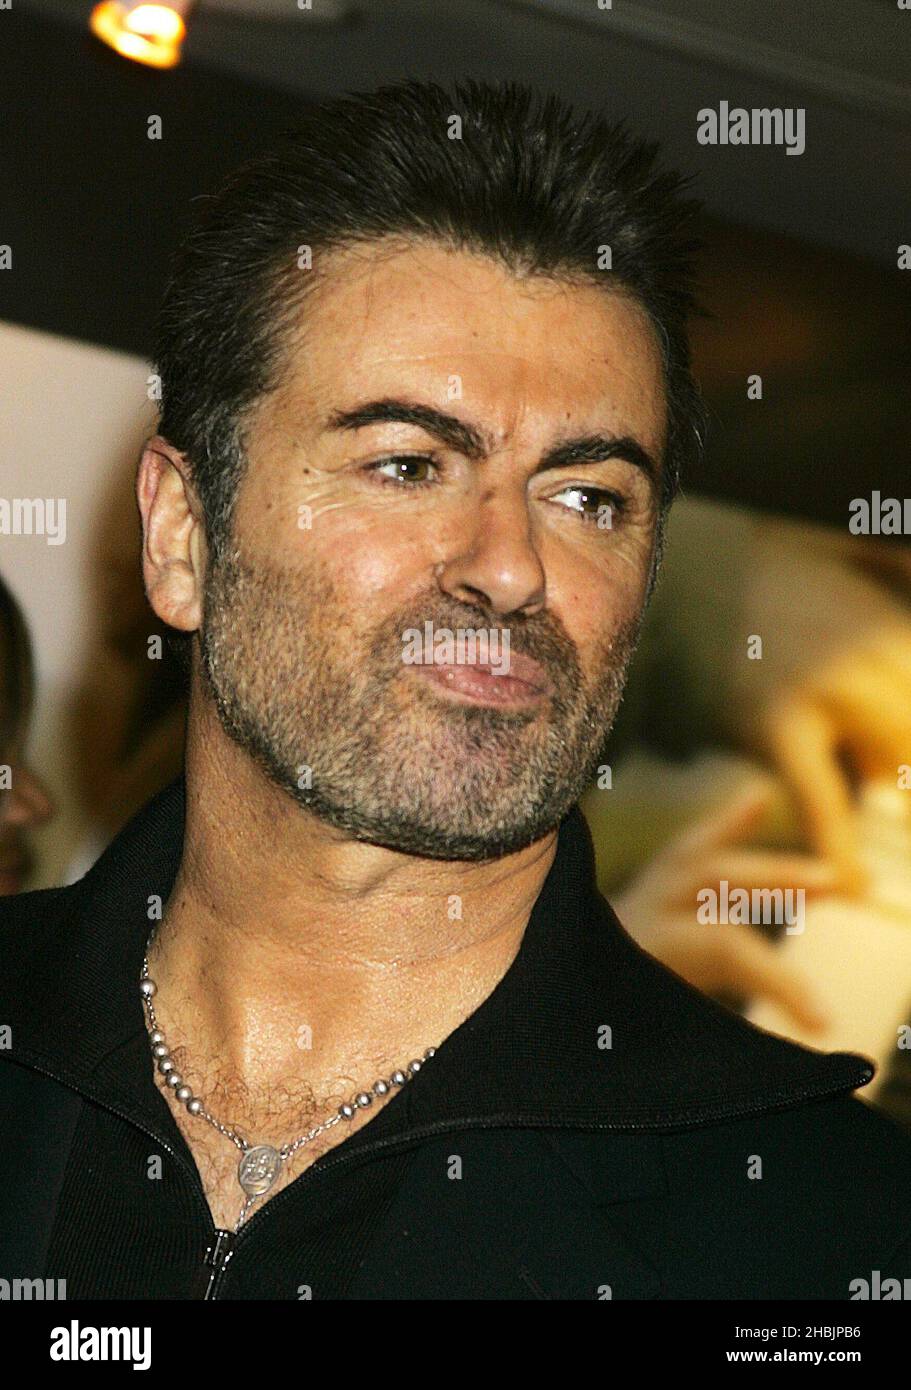 George Michael attending the Music Industry Awards at Grosvenor House Hotel in London. Stock Photo